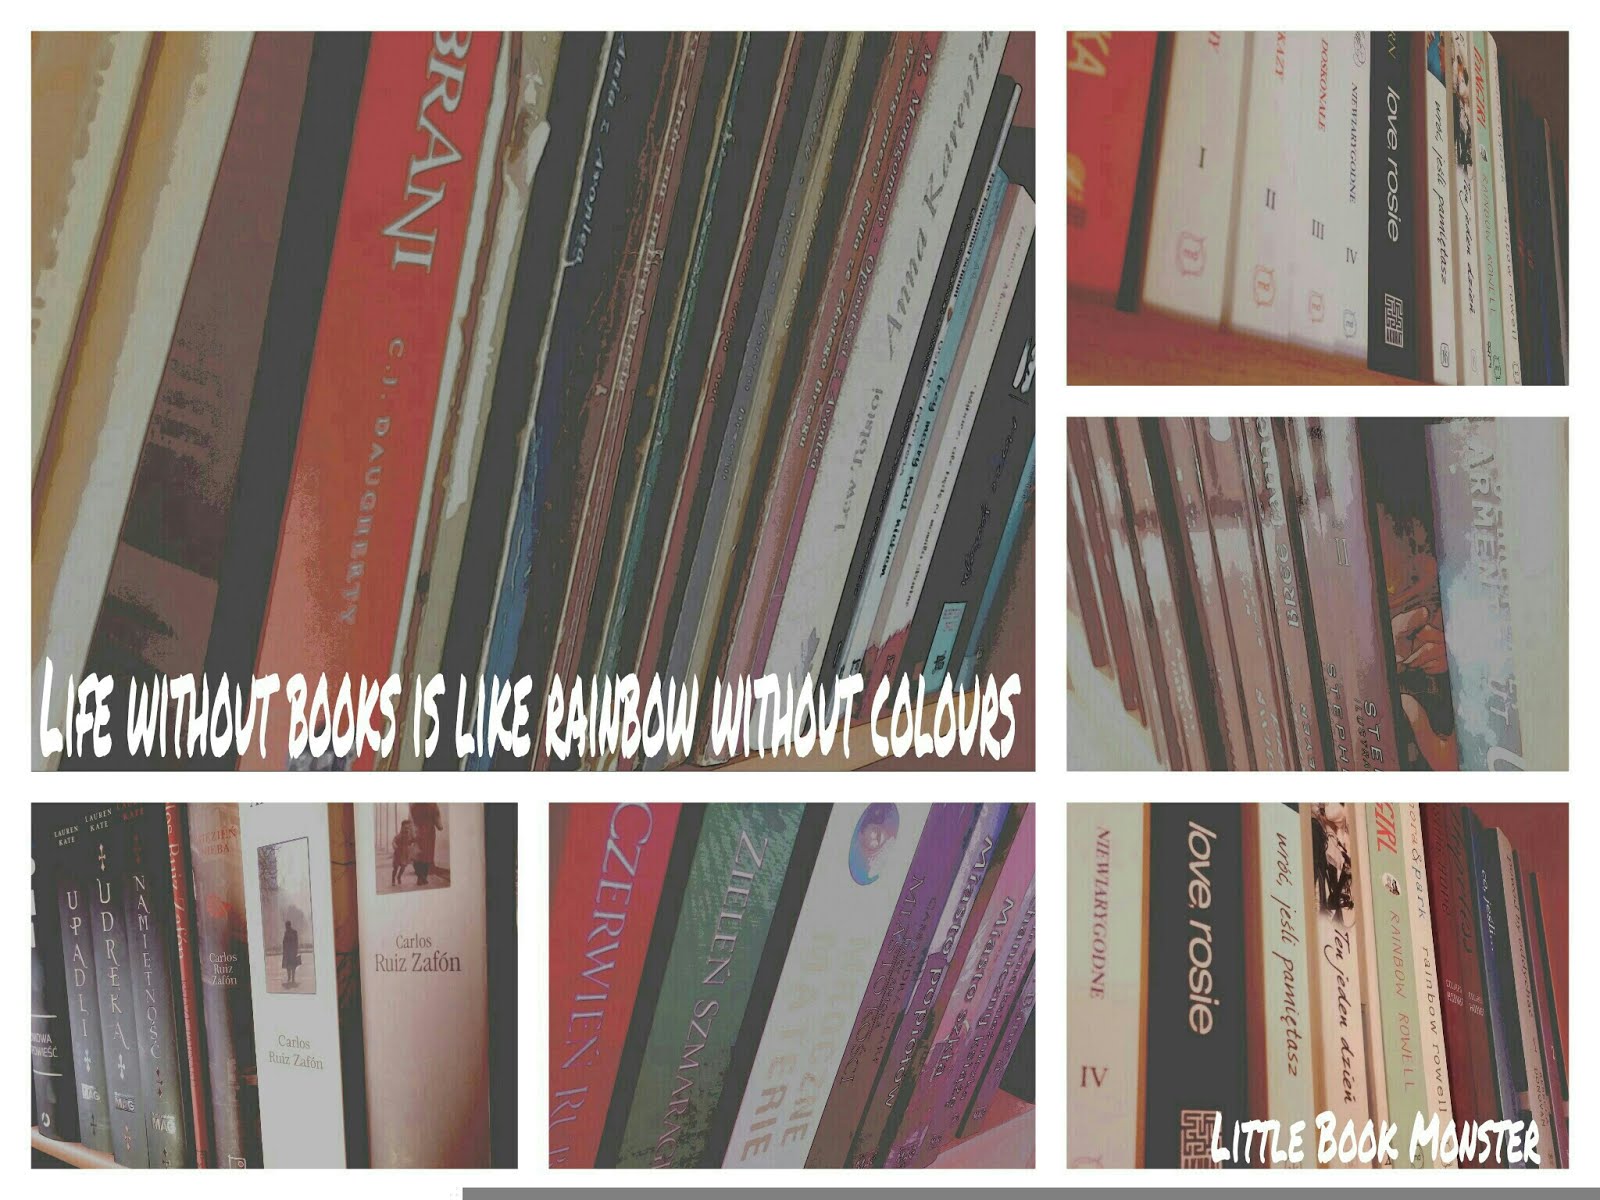 Life without books is like rainbow without colours